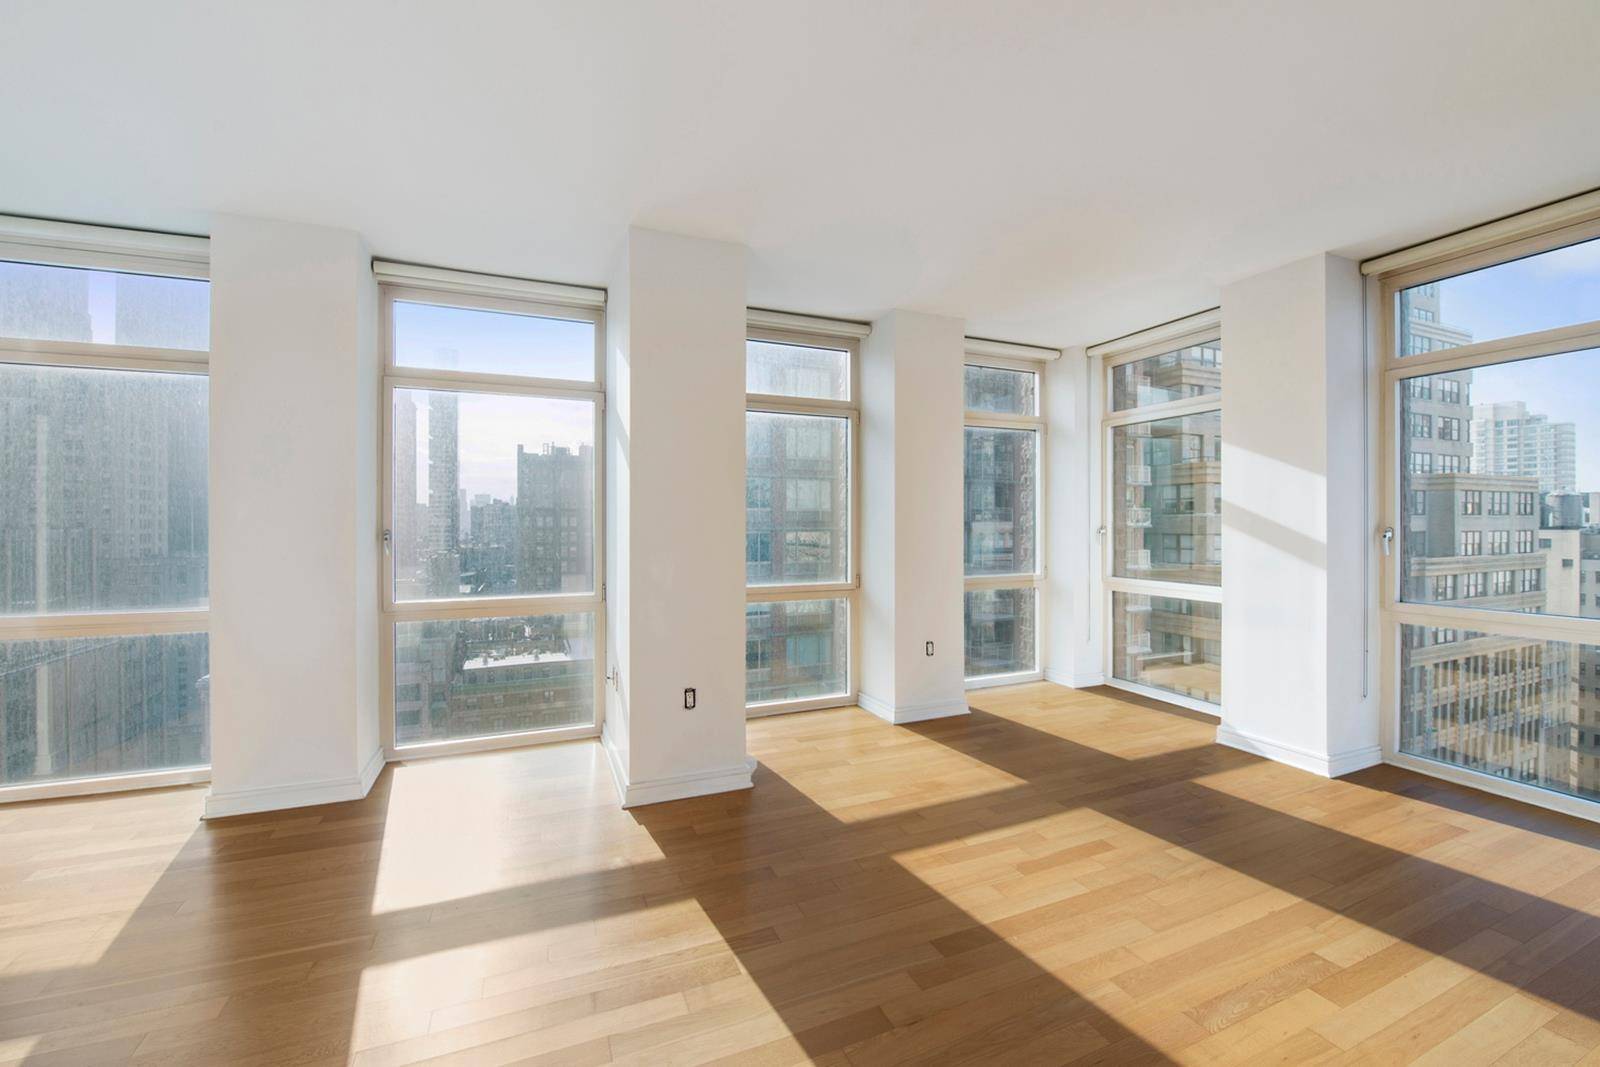 Fabulous spacious over 1600SF two bedroom convertible 3BR home at the Sky House Condominium.